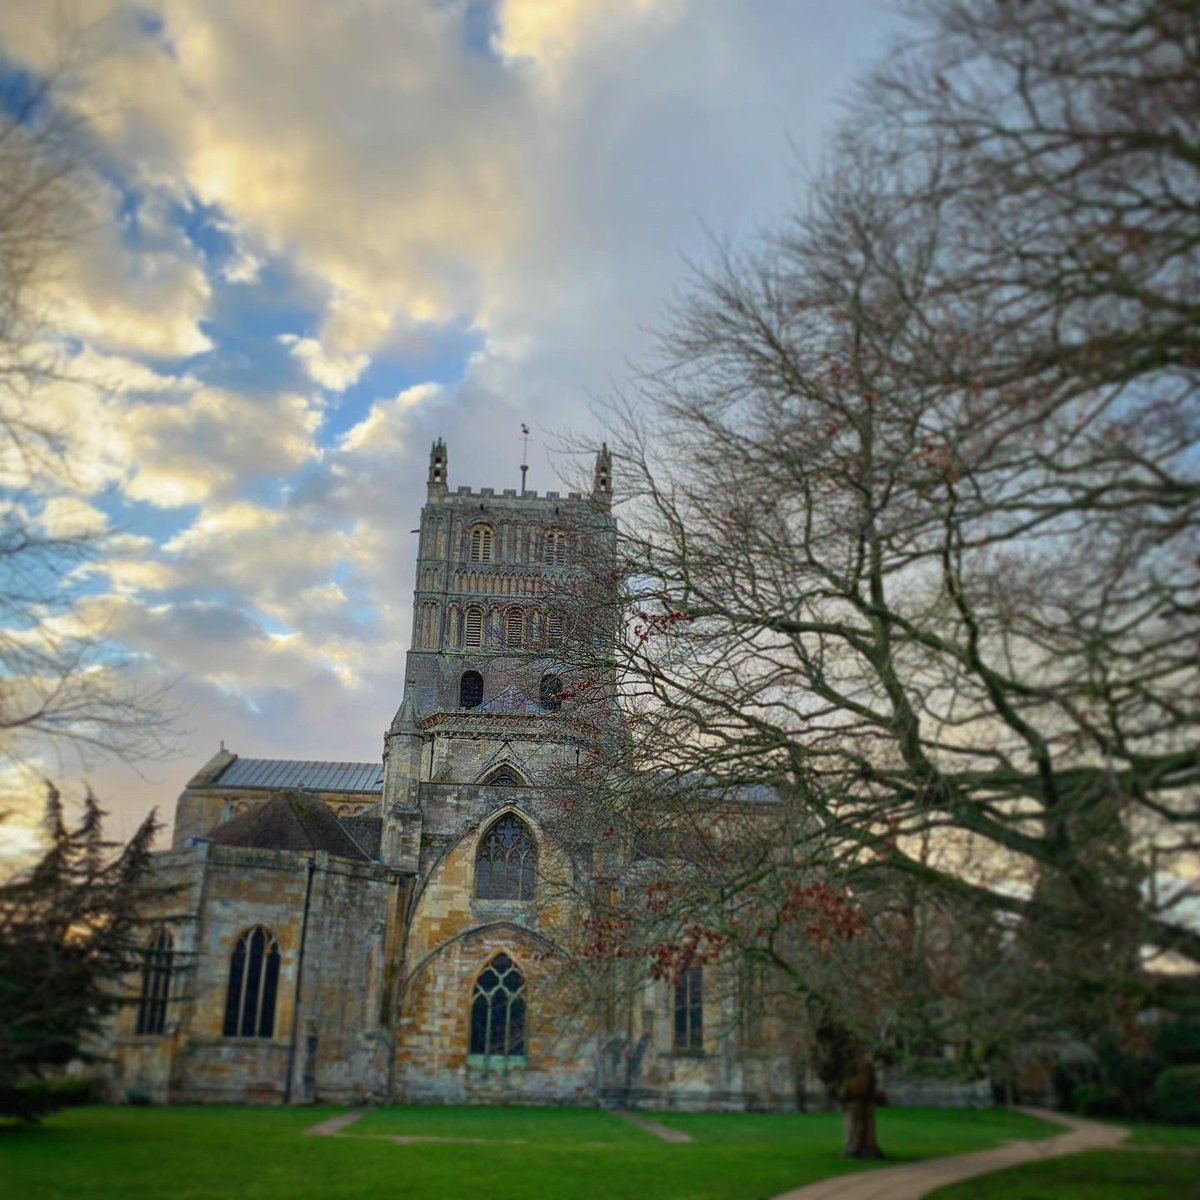 A wonderful evensong at @GlosCathedral, sung by the Chamber Choirs of the three schools attached to @3choirs cathedrals - congratulations to all involved! …and all that after calling in on Gloucestershire’s other glorious church building for a catch-up 😍